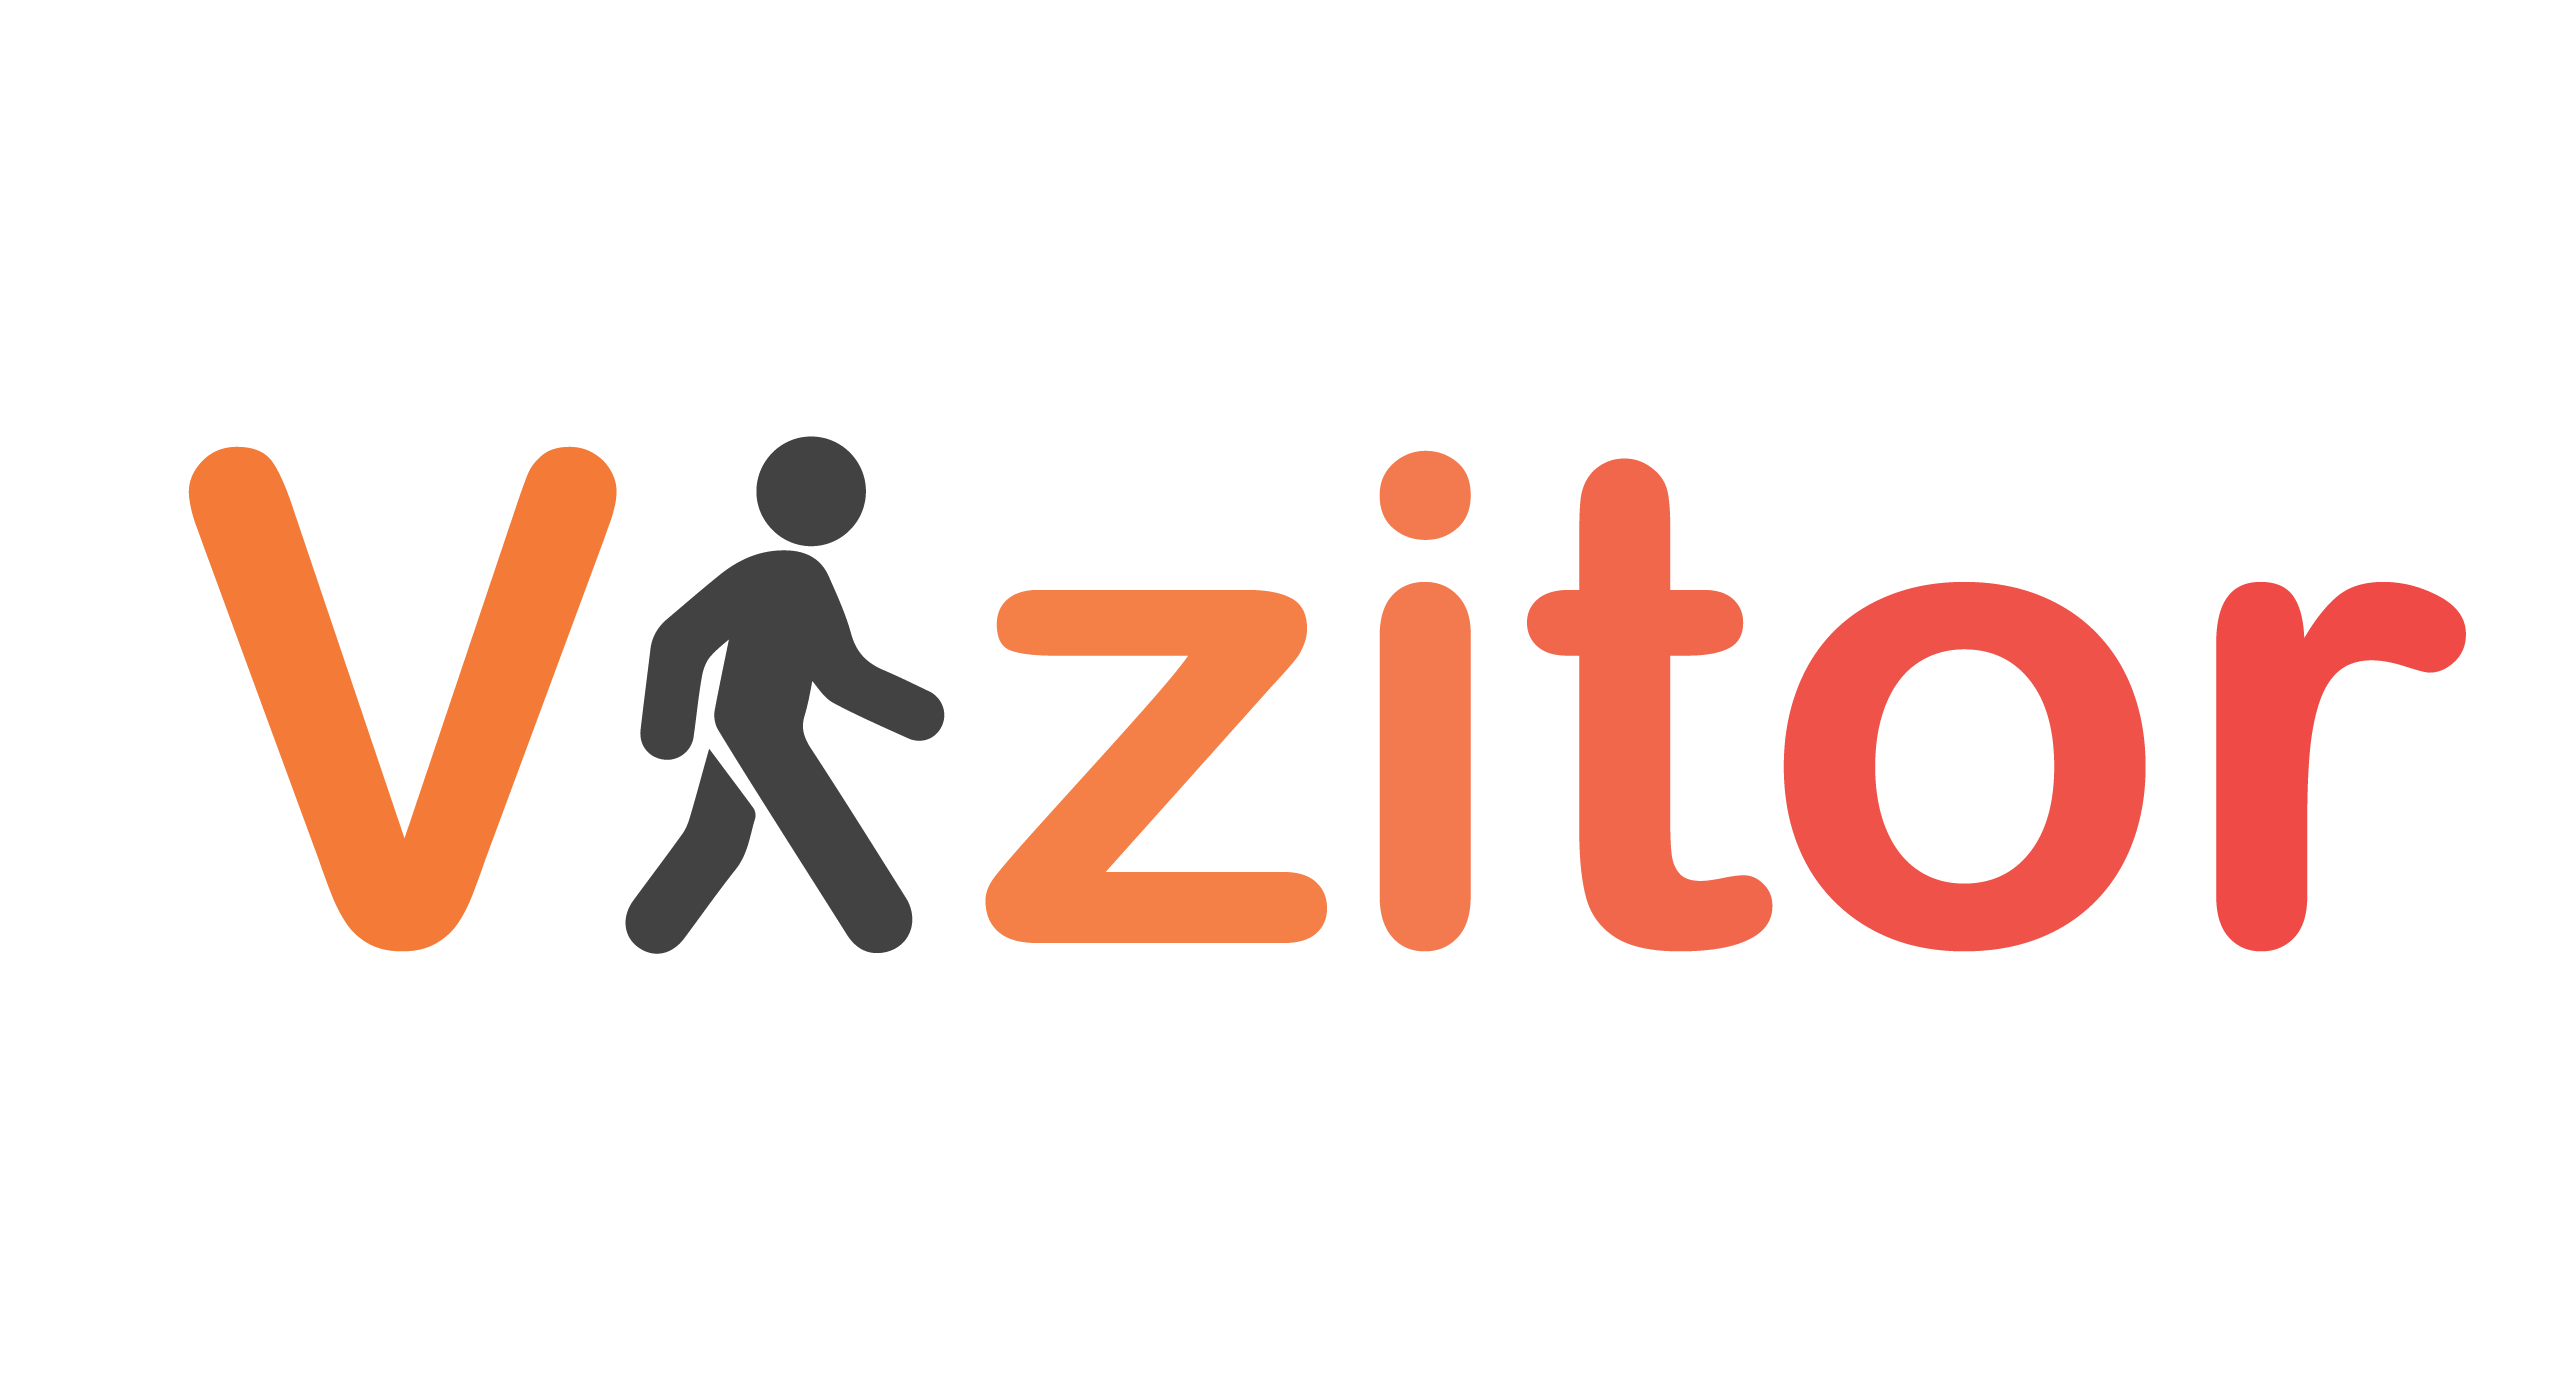 Introducing Vizitor - A Visitor Management System